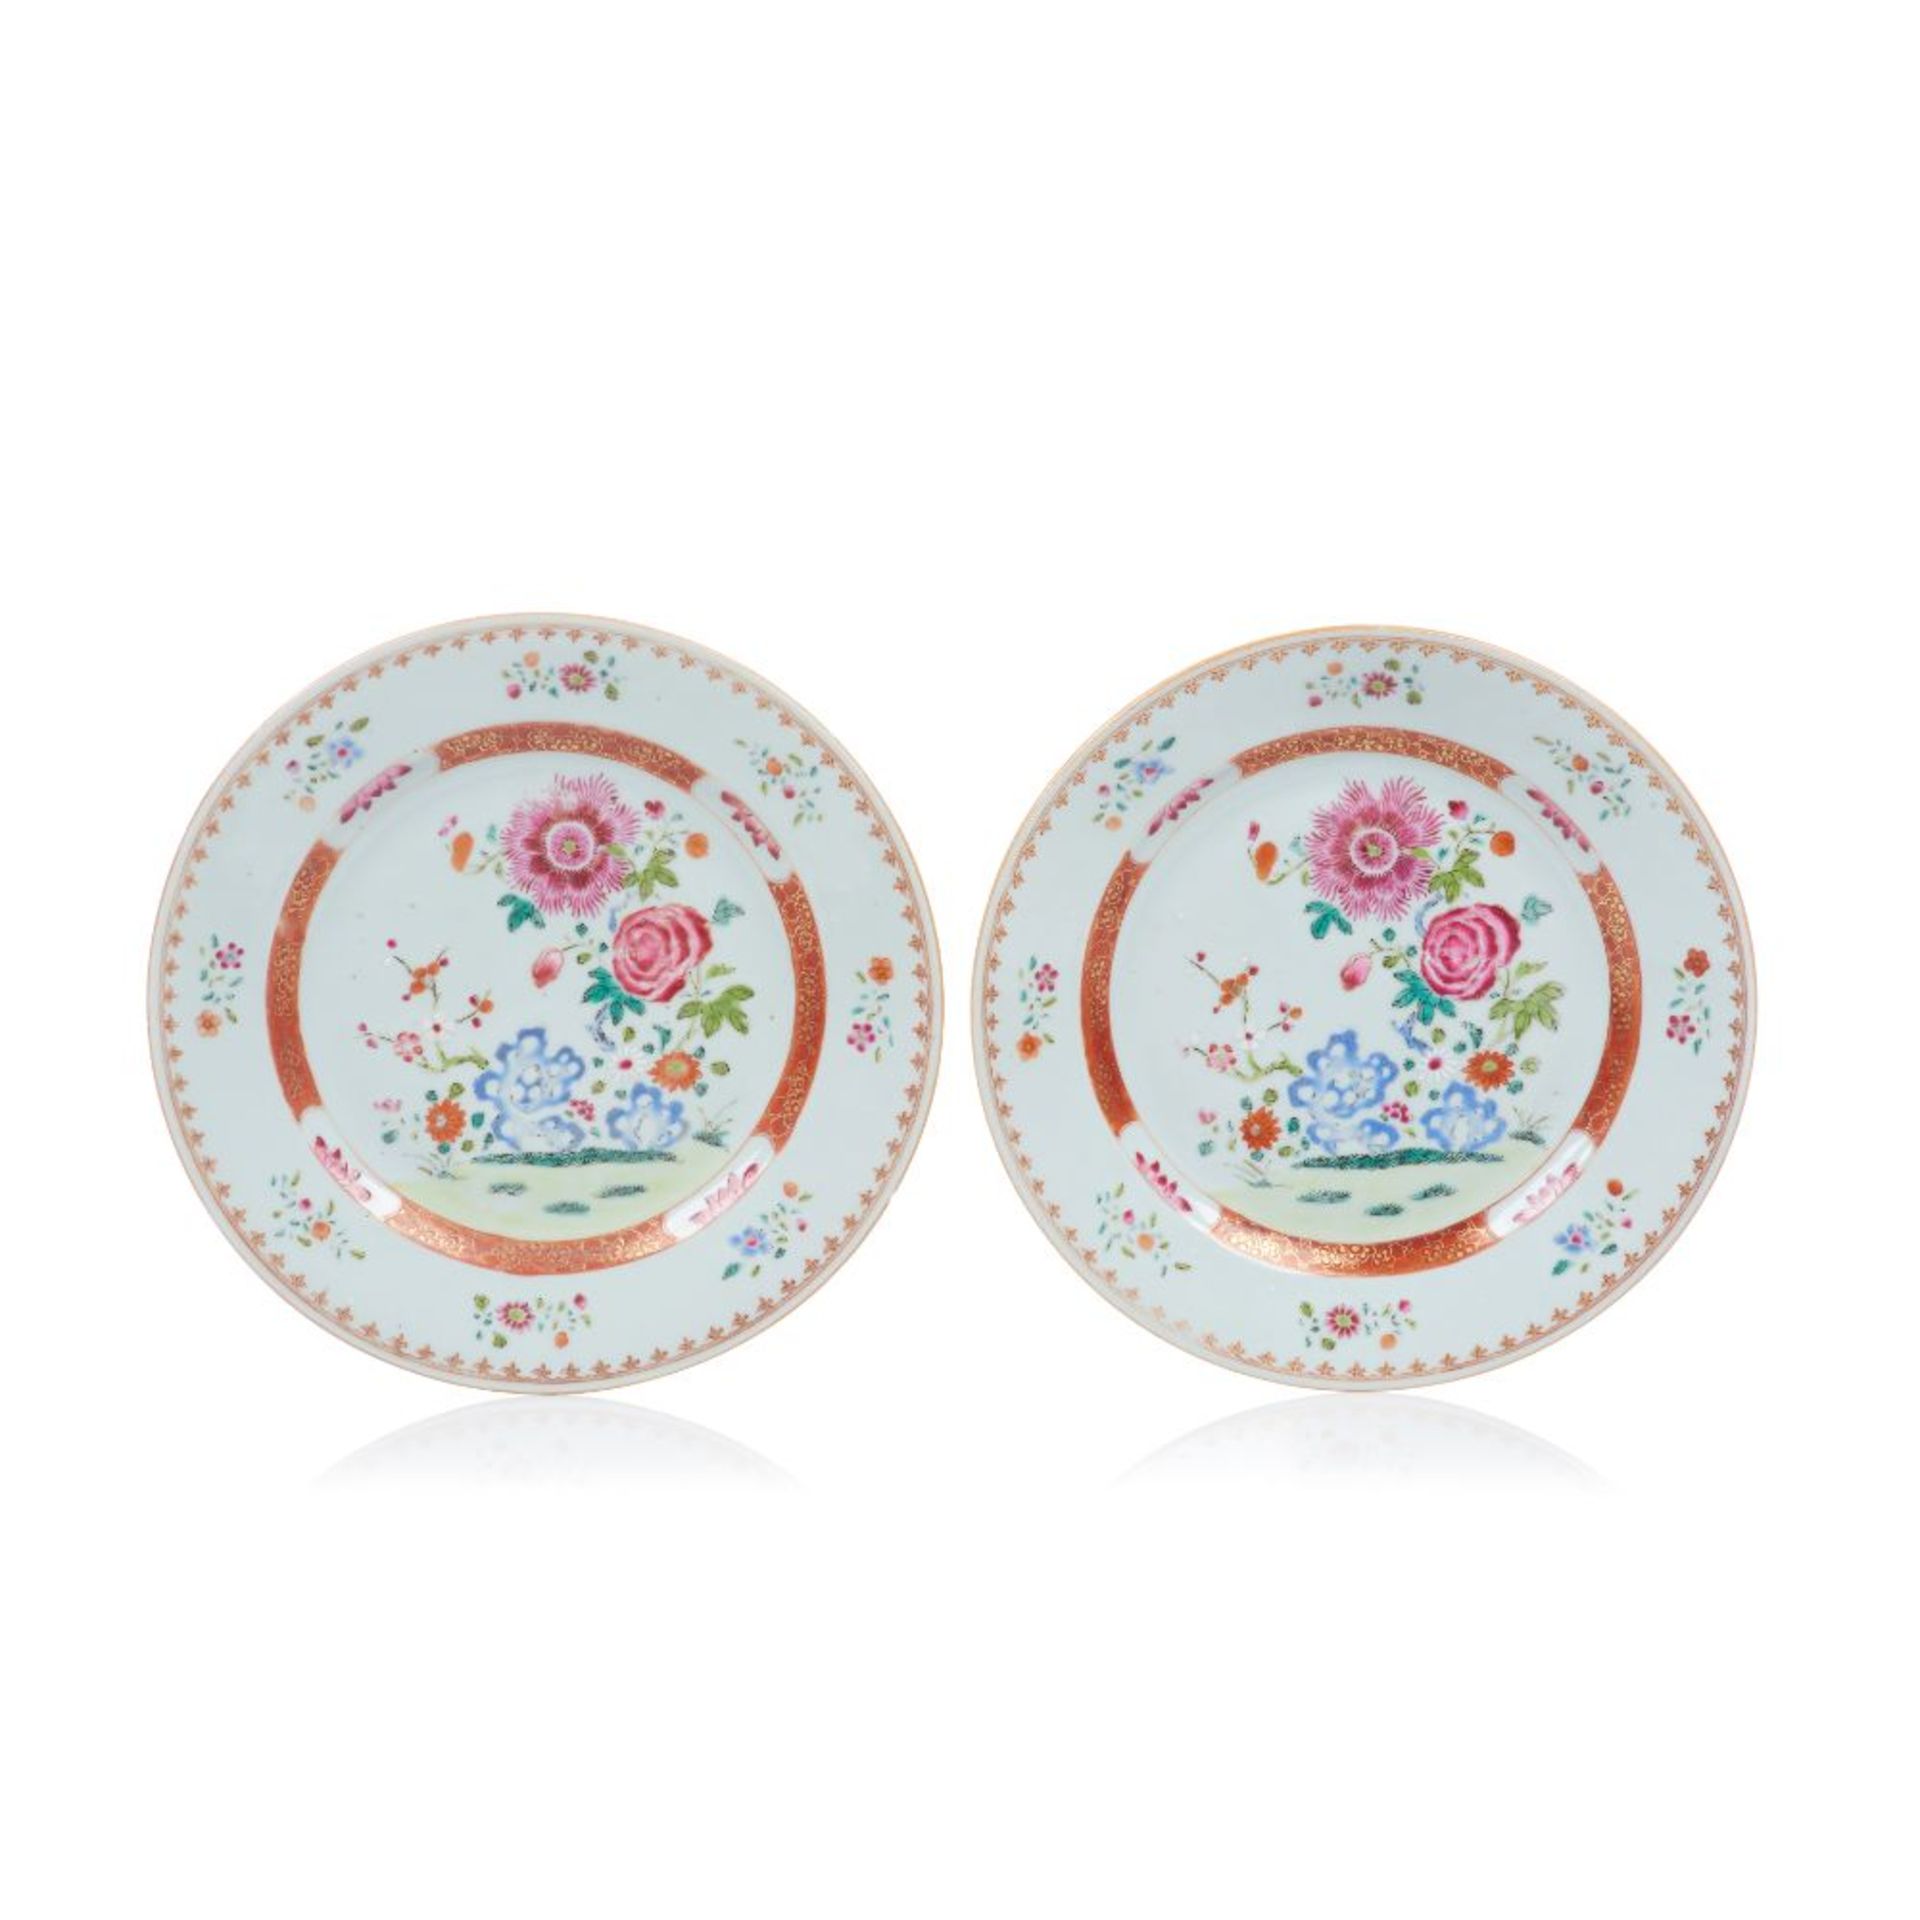 A pair of plates, Chinese export porcelain, Polychrome Famille Rose enamelled and iron oxide